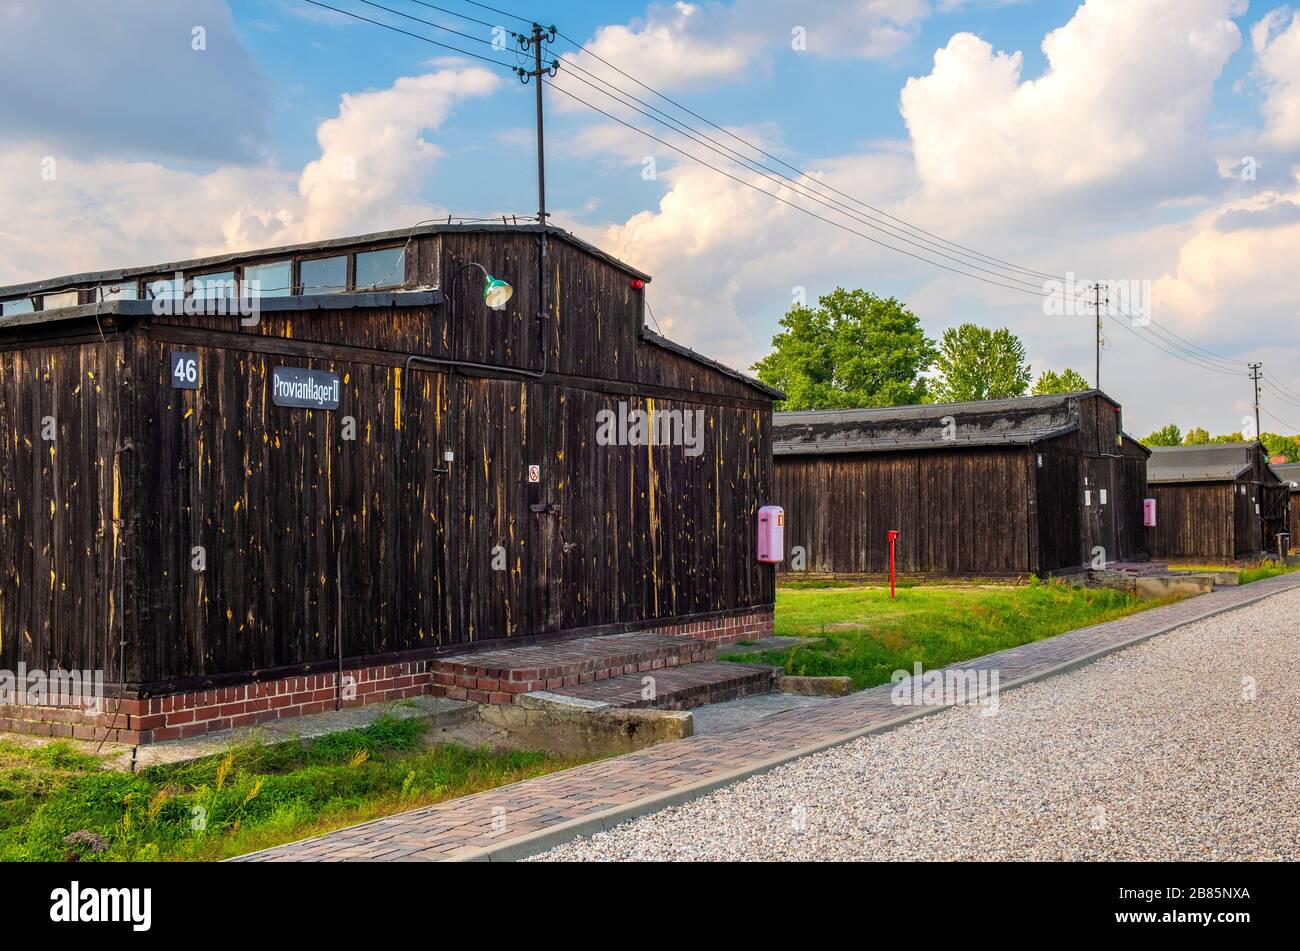 Lublin, Lubelskie / Poland - 2019/08/17: Barracks and fences of the Majdanek KL Lublin Nazis concentration camp - Konzentrationslager Lublin Stock Photo